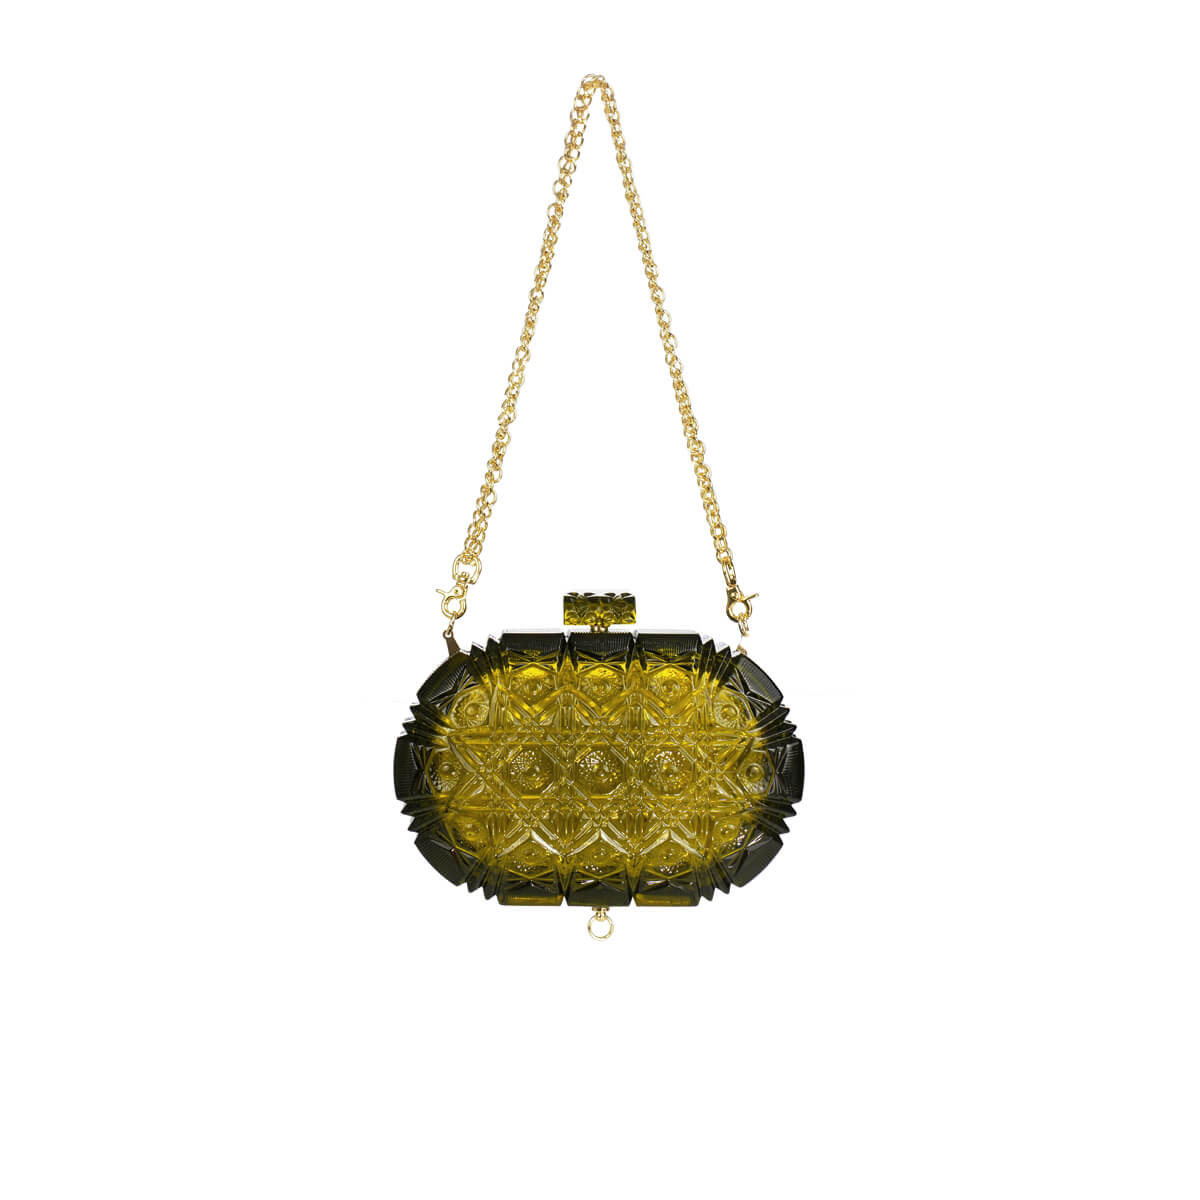 NEW IN Edged Oval Clutch Olive